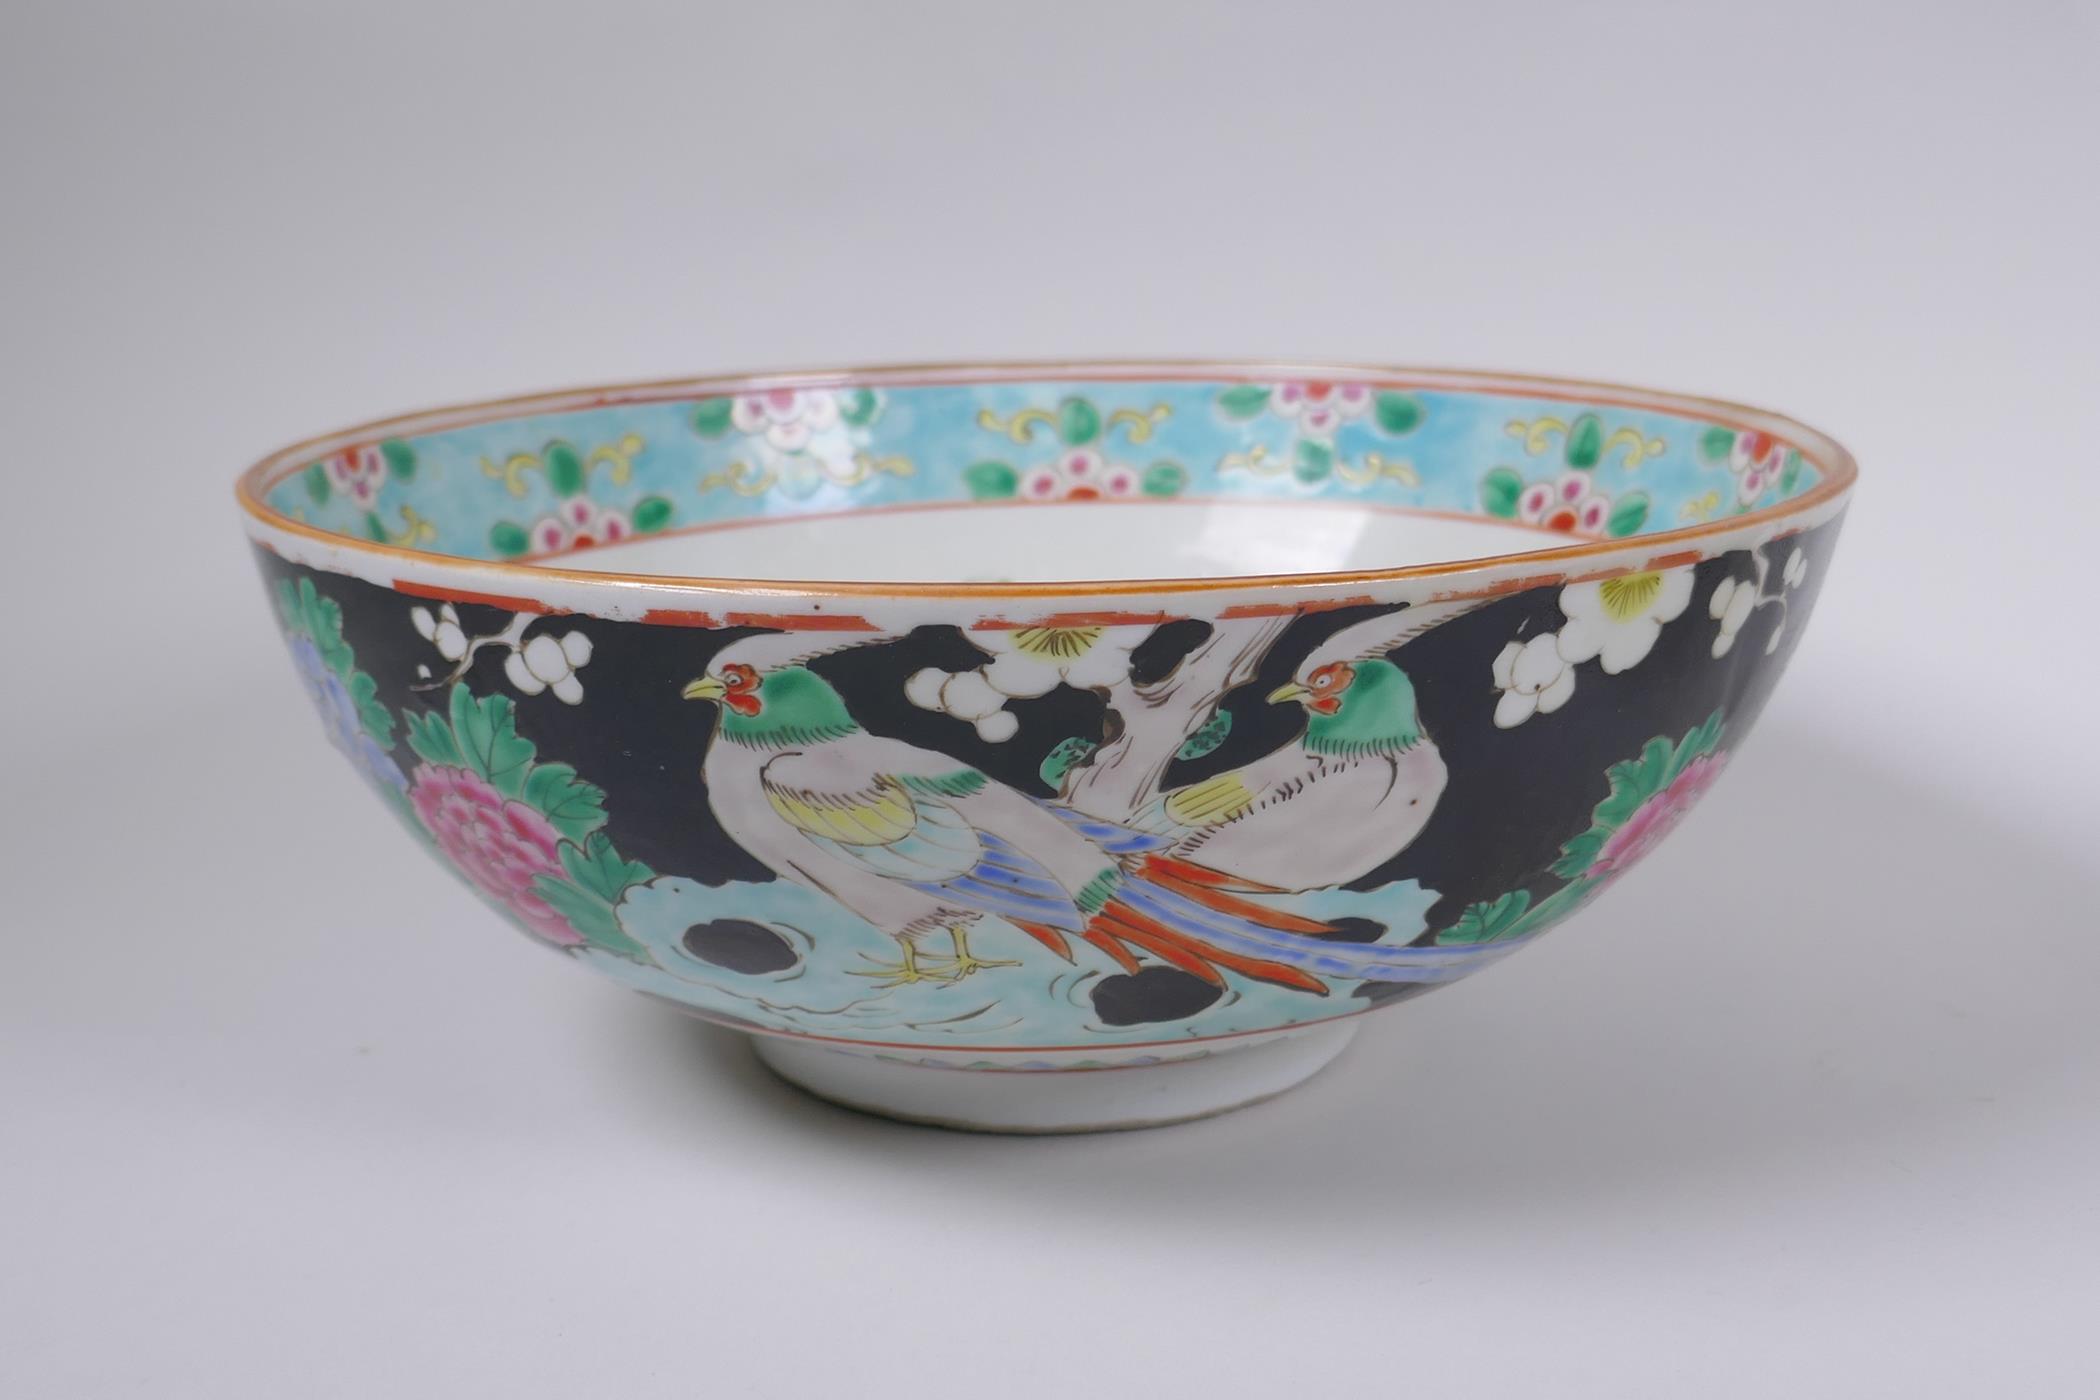 An C18th/C19th Chinese famille rose enamelled porcelain cabinet plate with riverside landscape - Image 7 of 9